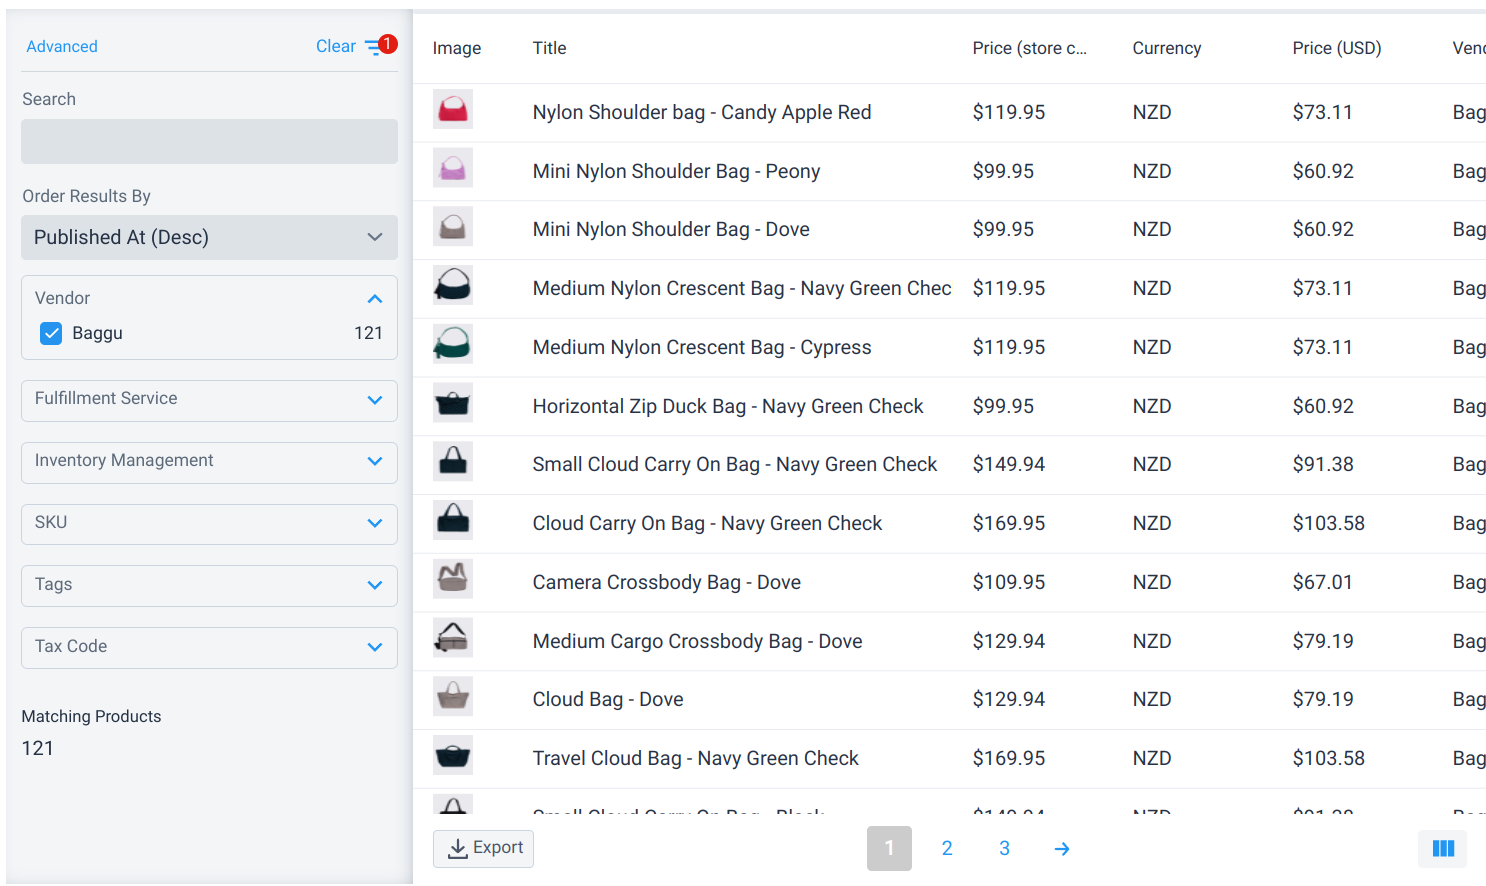 Details for stores sold at a domain with export button